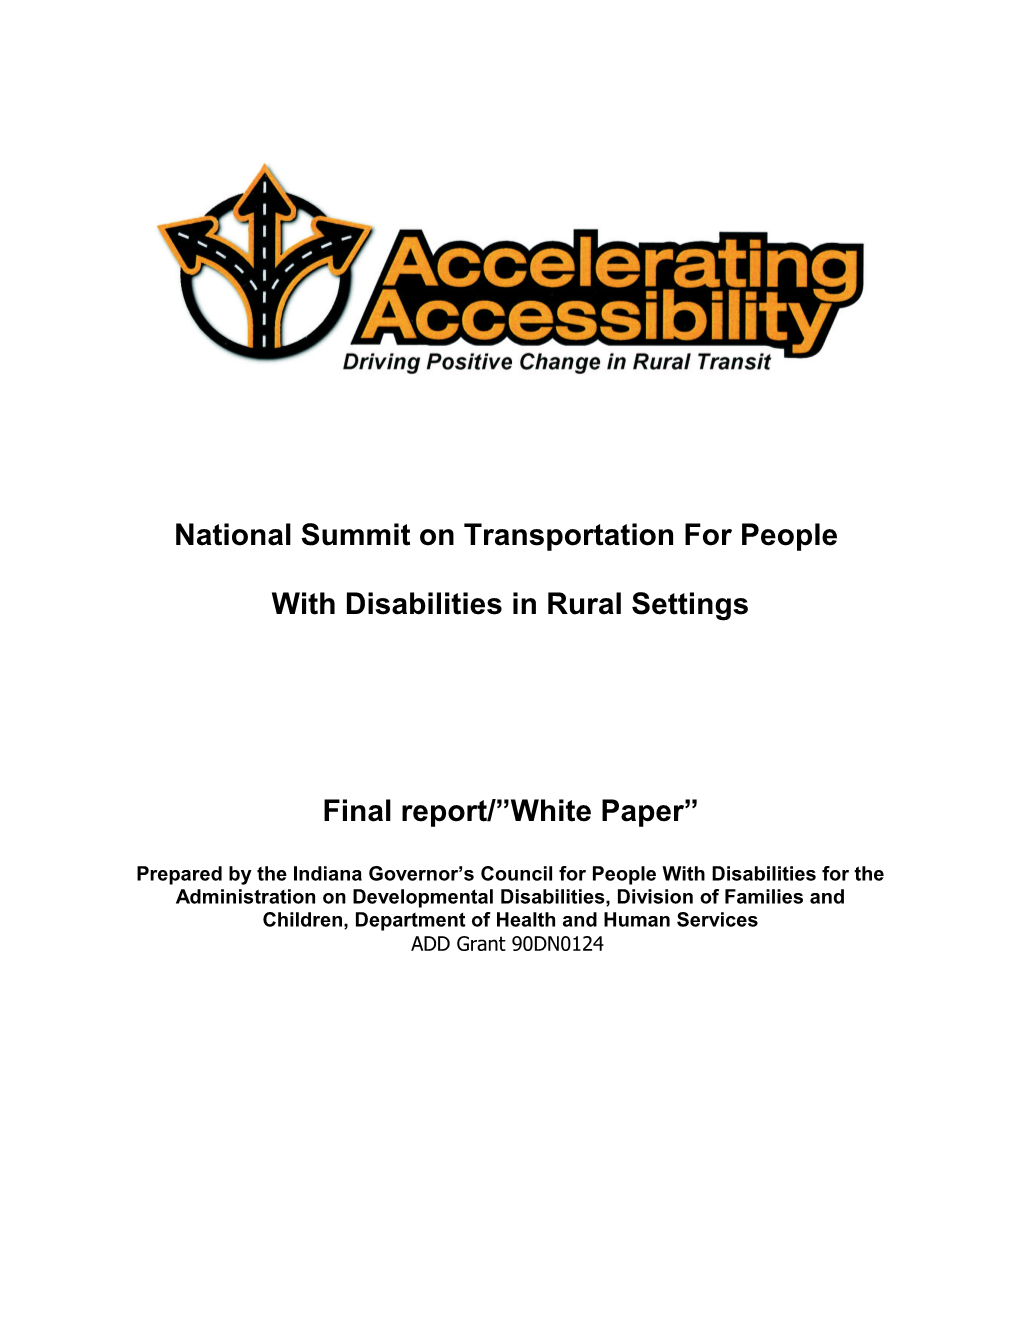 Many People Who Have Been Involved in Transportation for Pwd Have Been Involved in Dientifying